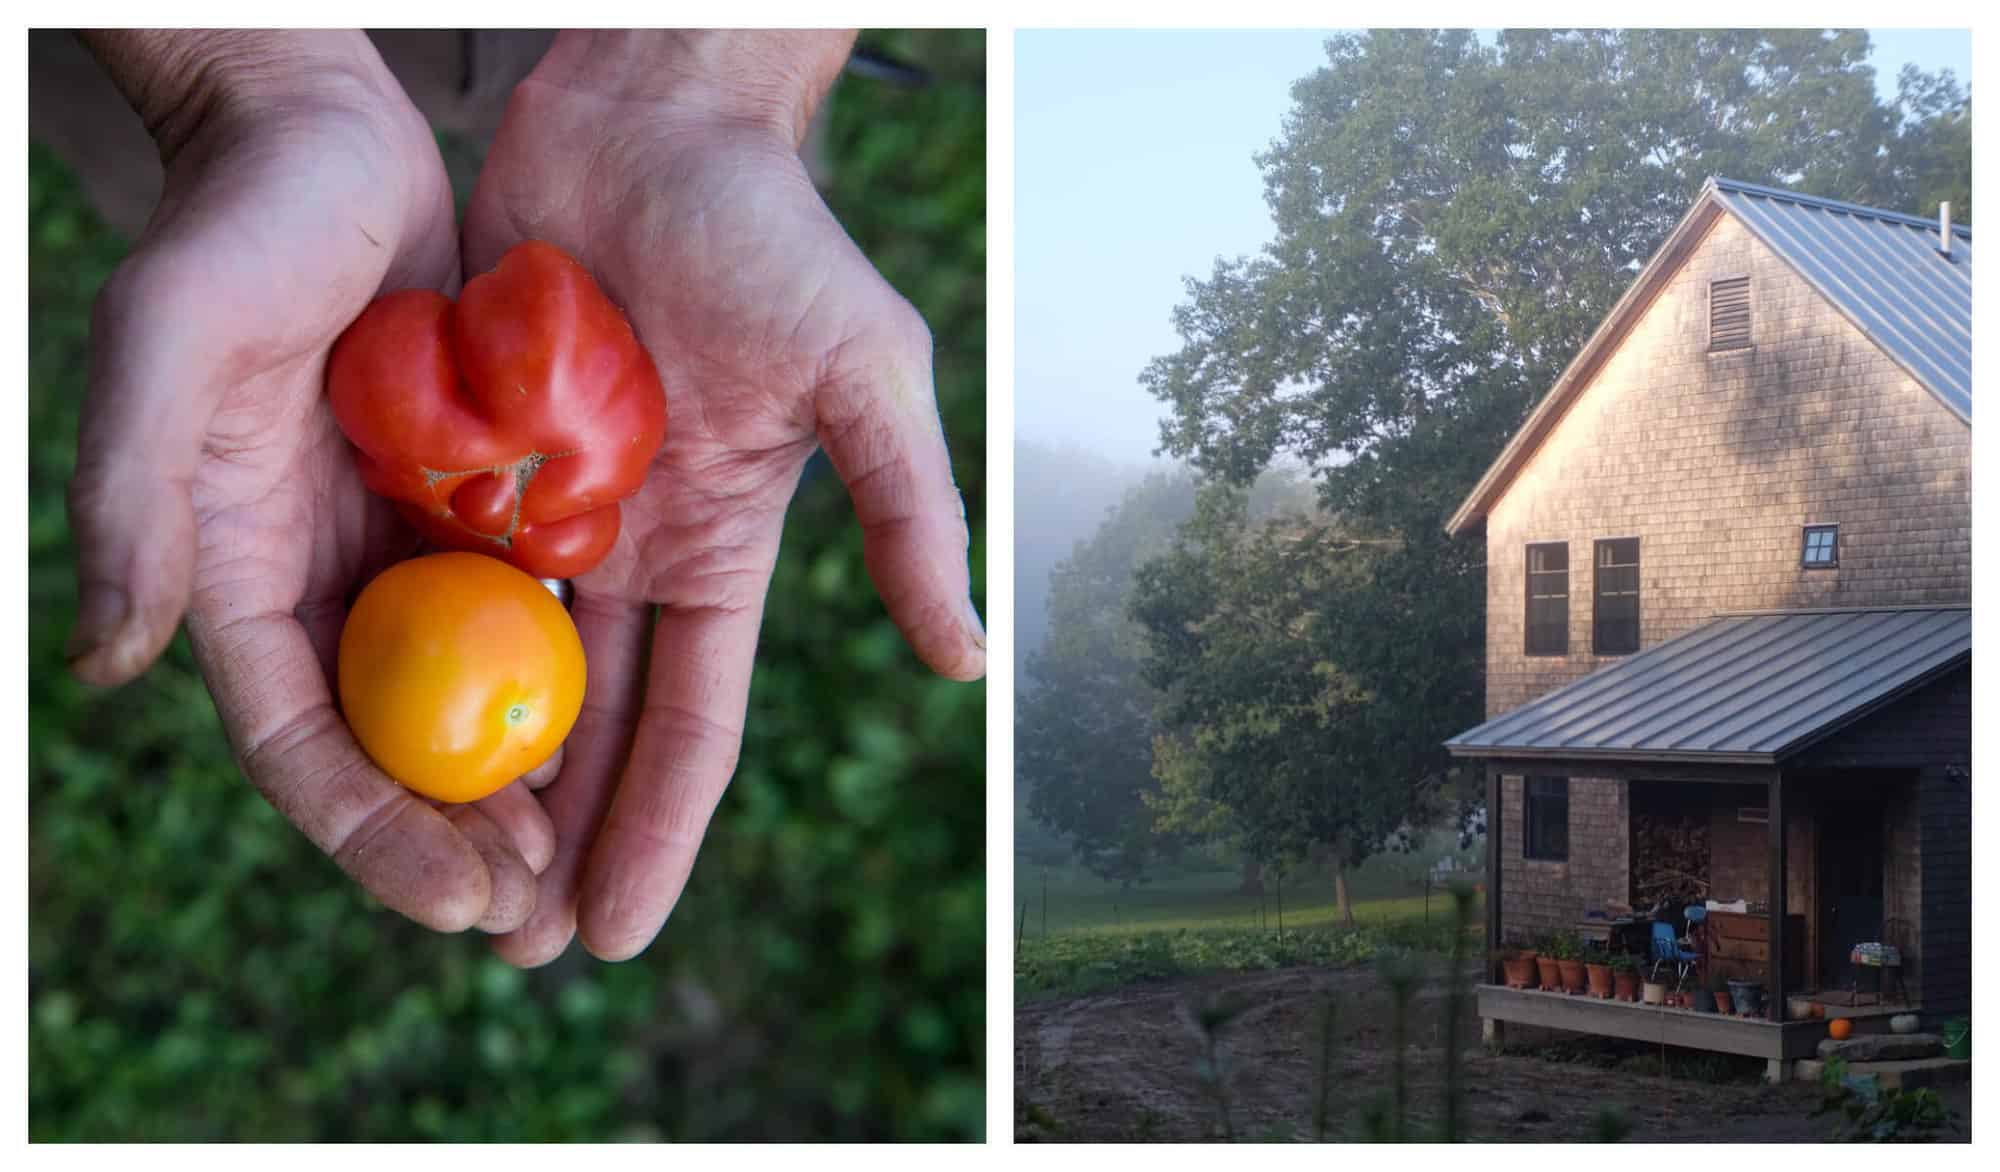 Left: A hand holds out two pieces of tomatoes, one orange and one yellow. Right: A house with gray roof and bricked walls beside a farm full of tall trees.